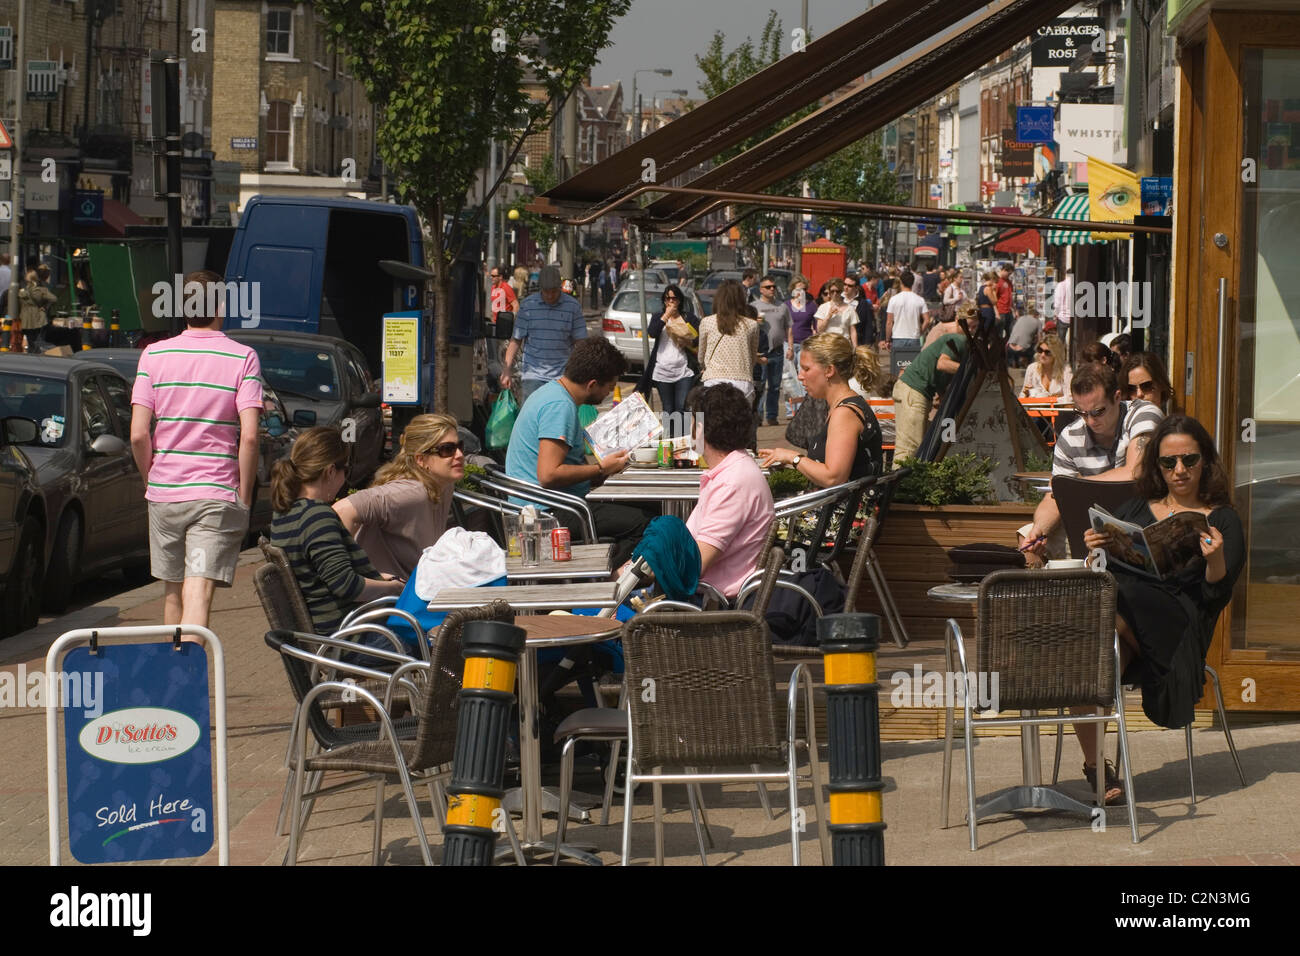 Northcote  Road Clapham London Borough of Wandsworth. SW11 Group crowds of people eating outside cafe society, crowded Saturday shoppers. HOMER SYKES Stock Photo